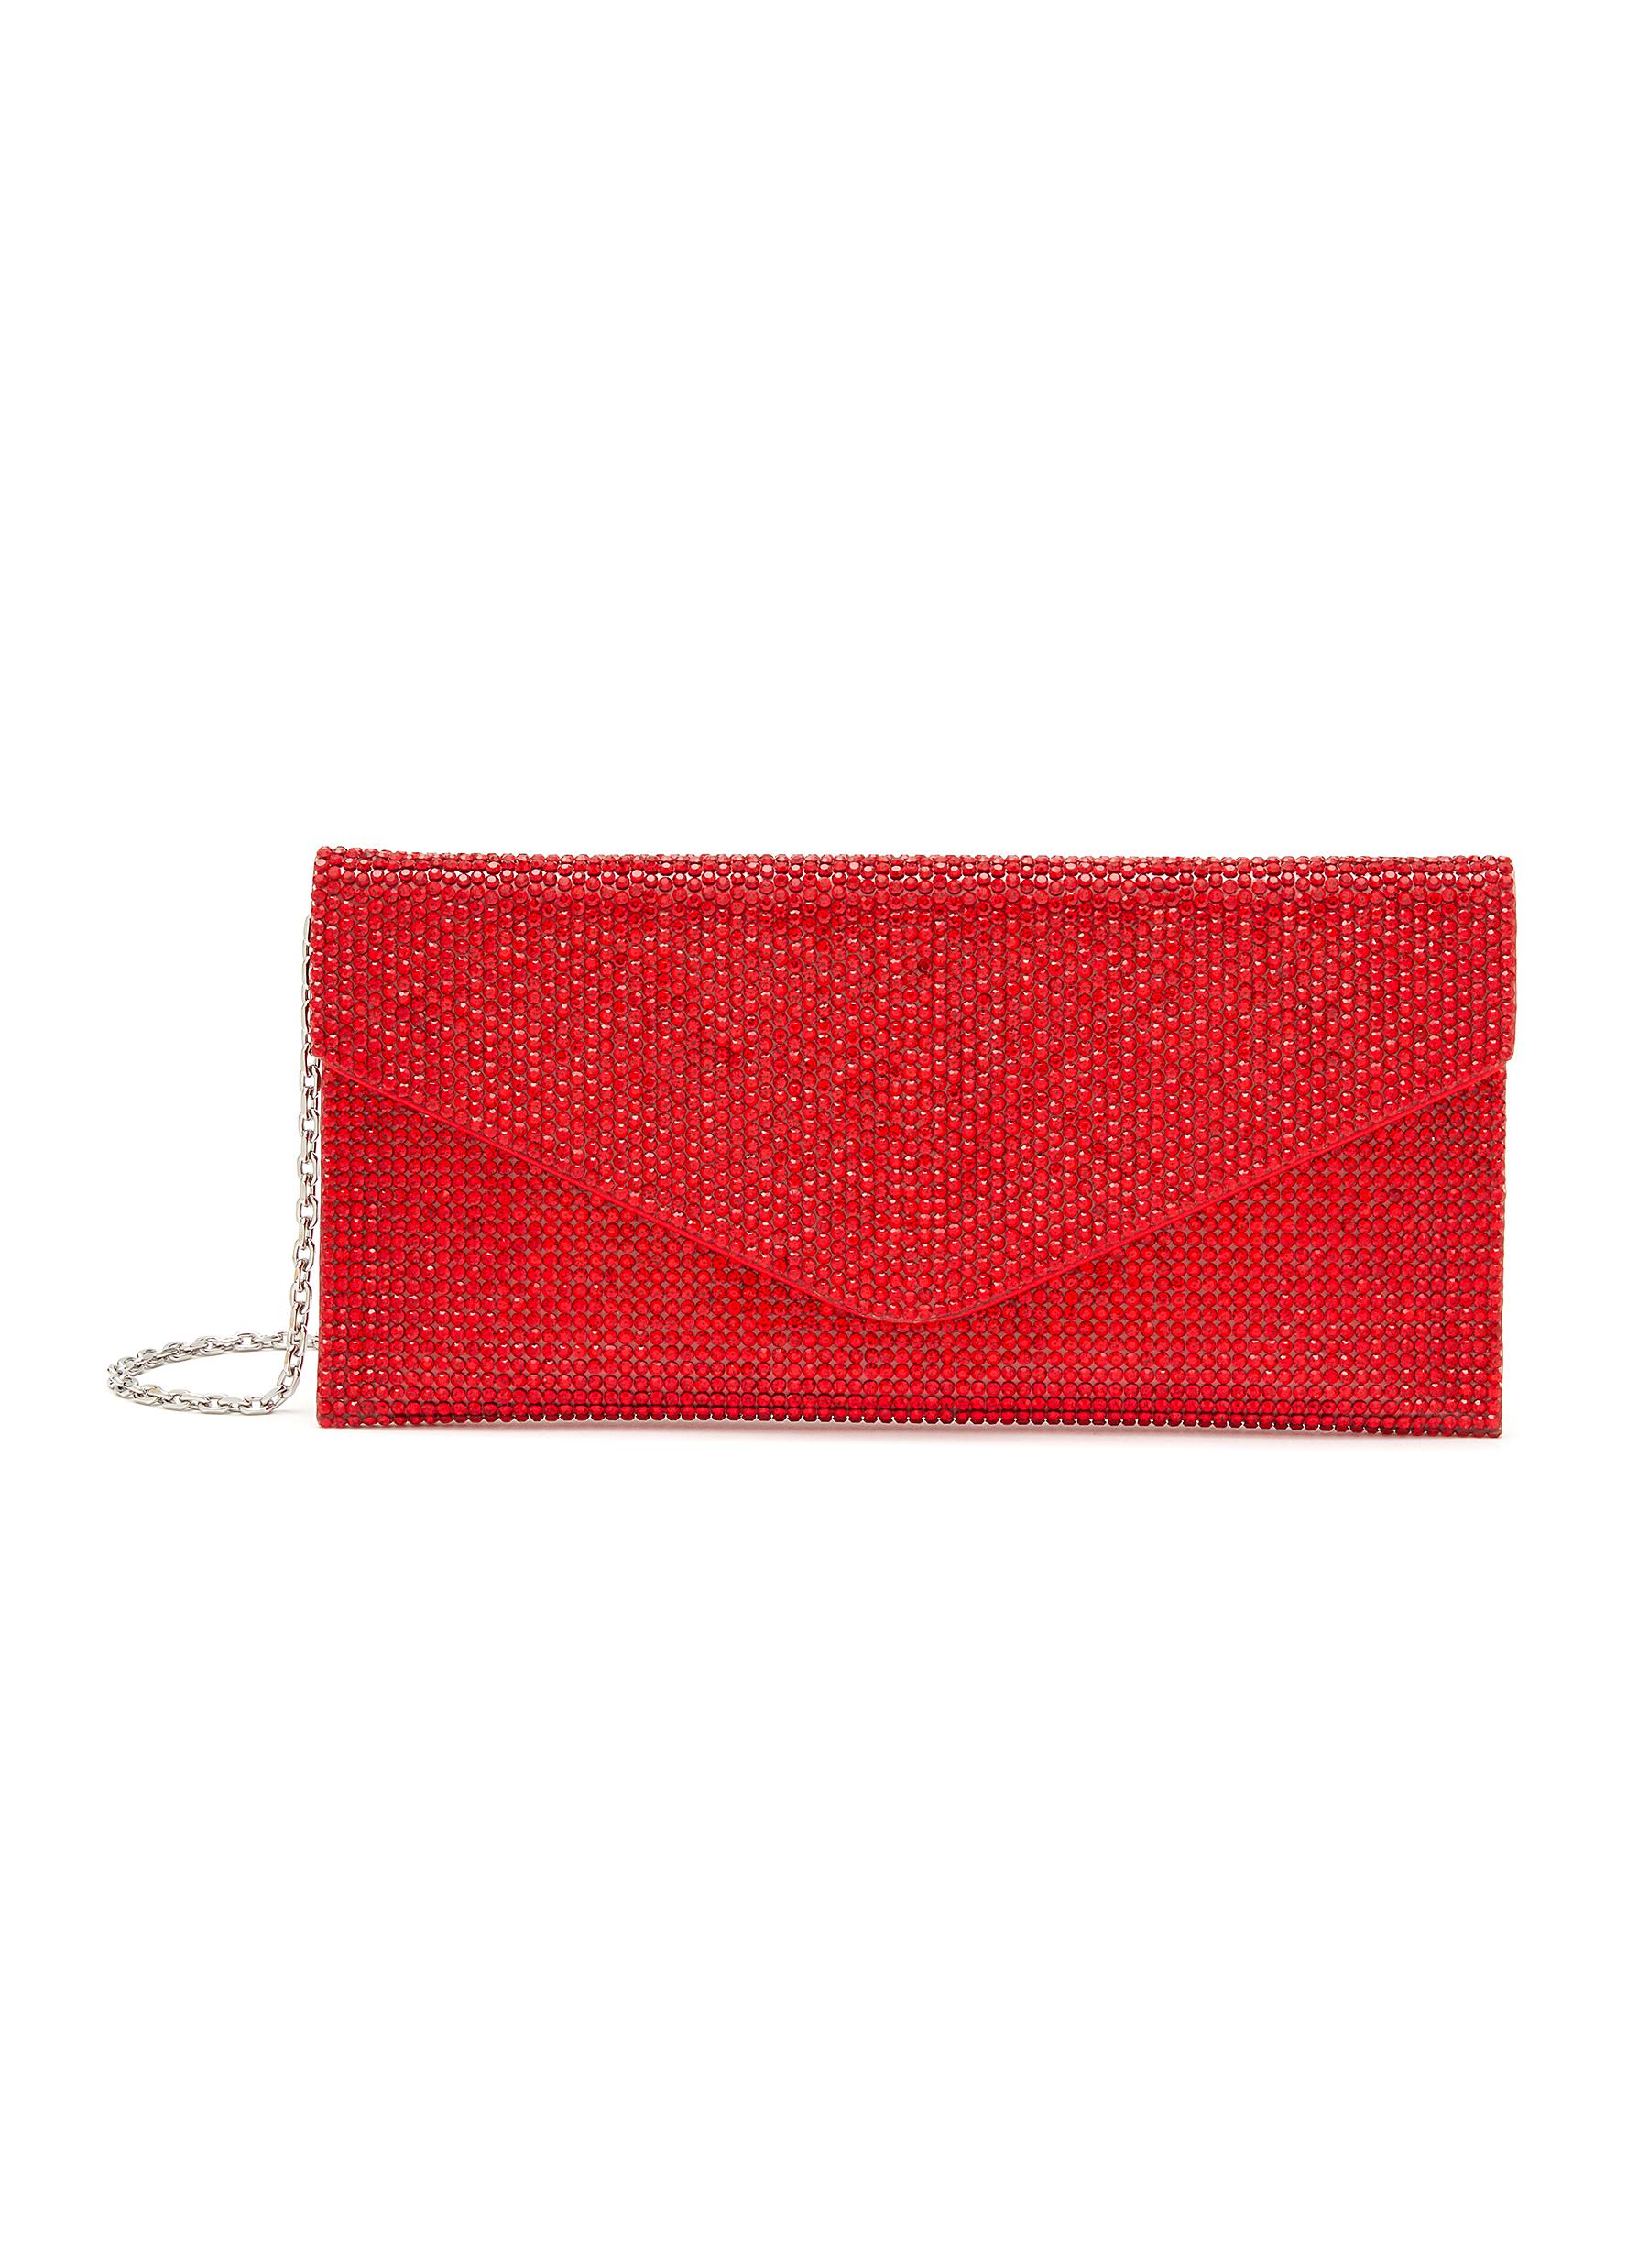 JUDITH LEIBER ENVELOPE RED CRYSTAL CHAIN CLUTCH